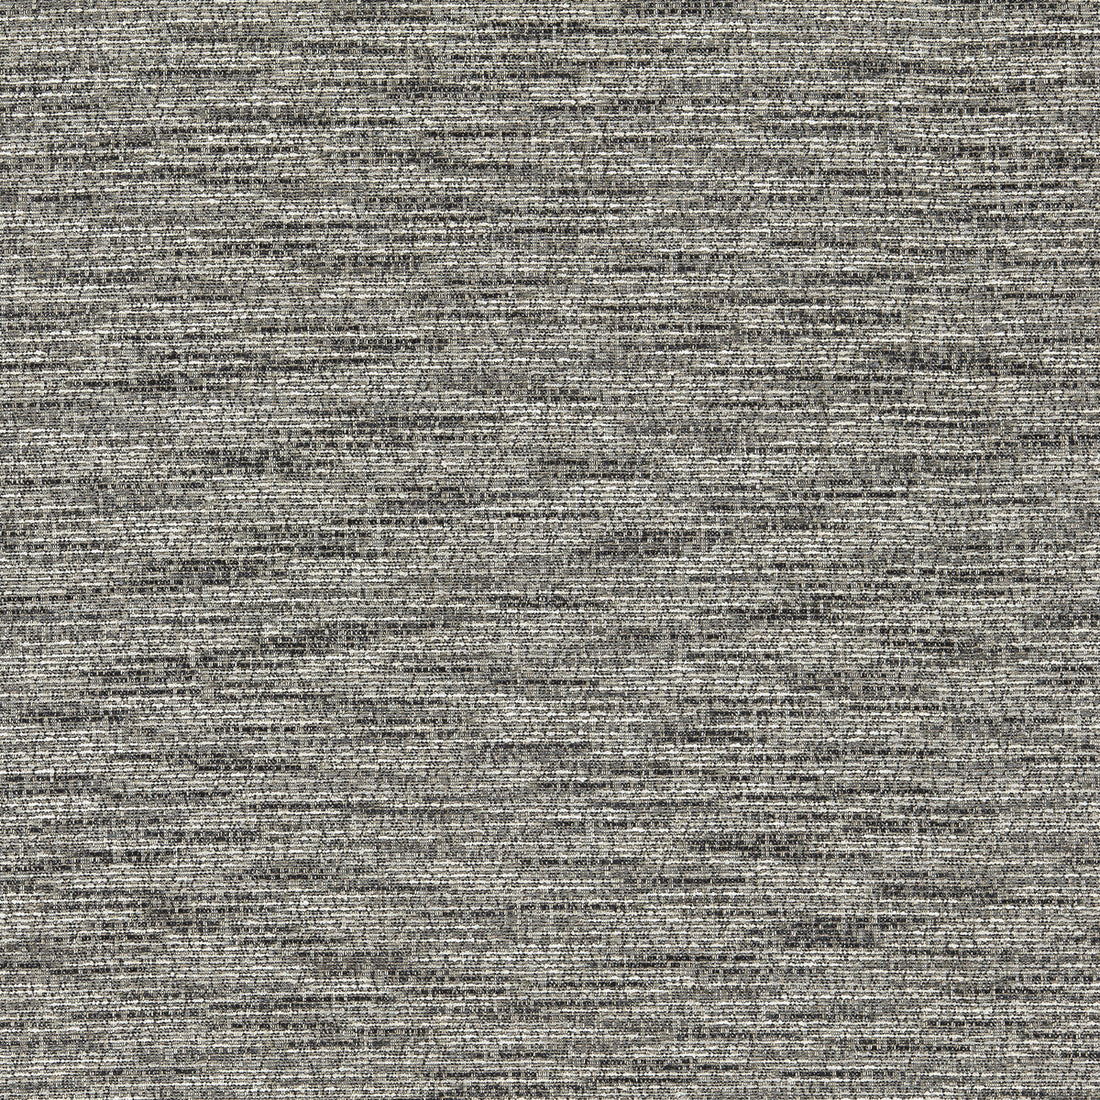 Cetara fabric in storm color - pattern F1642/19.CAC.0 - by Clarke And Clarke in the Cetara collection